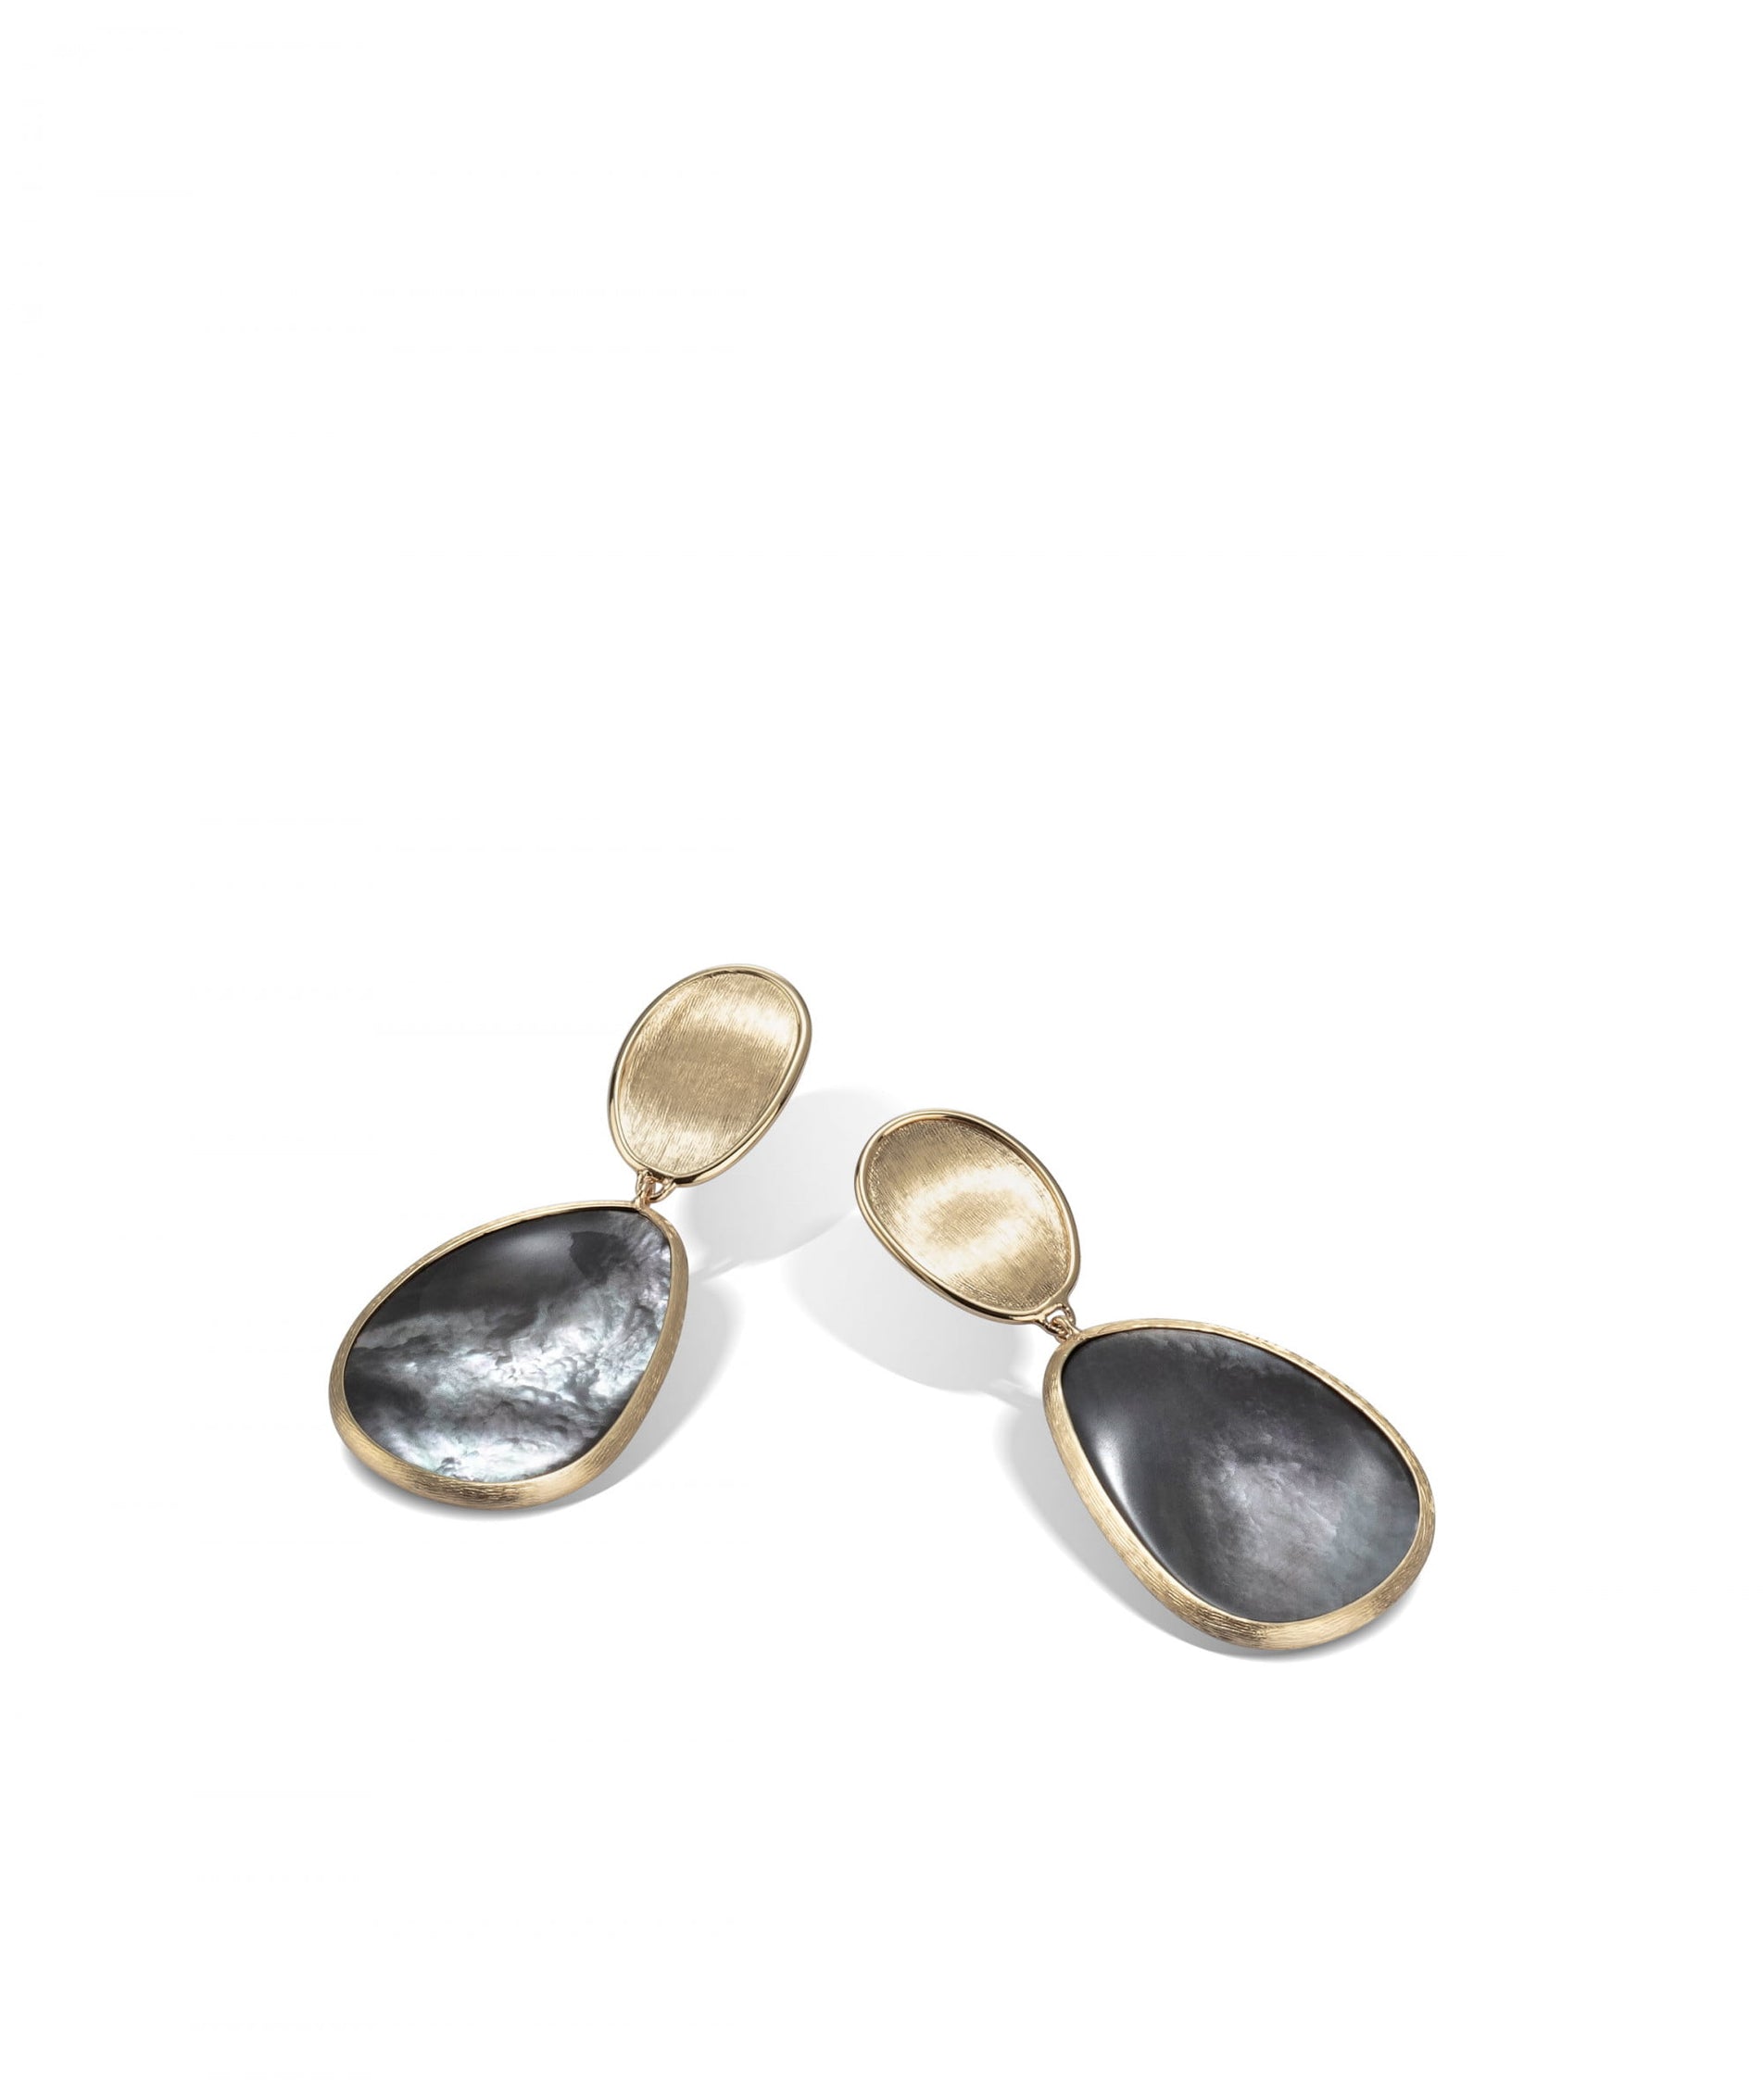 Lunaria Earrings in 18k Yellow Gold with Mother of Pearl Double Drop - Orsini Jewellers NZ